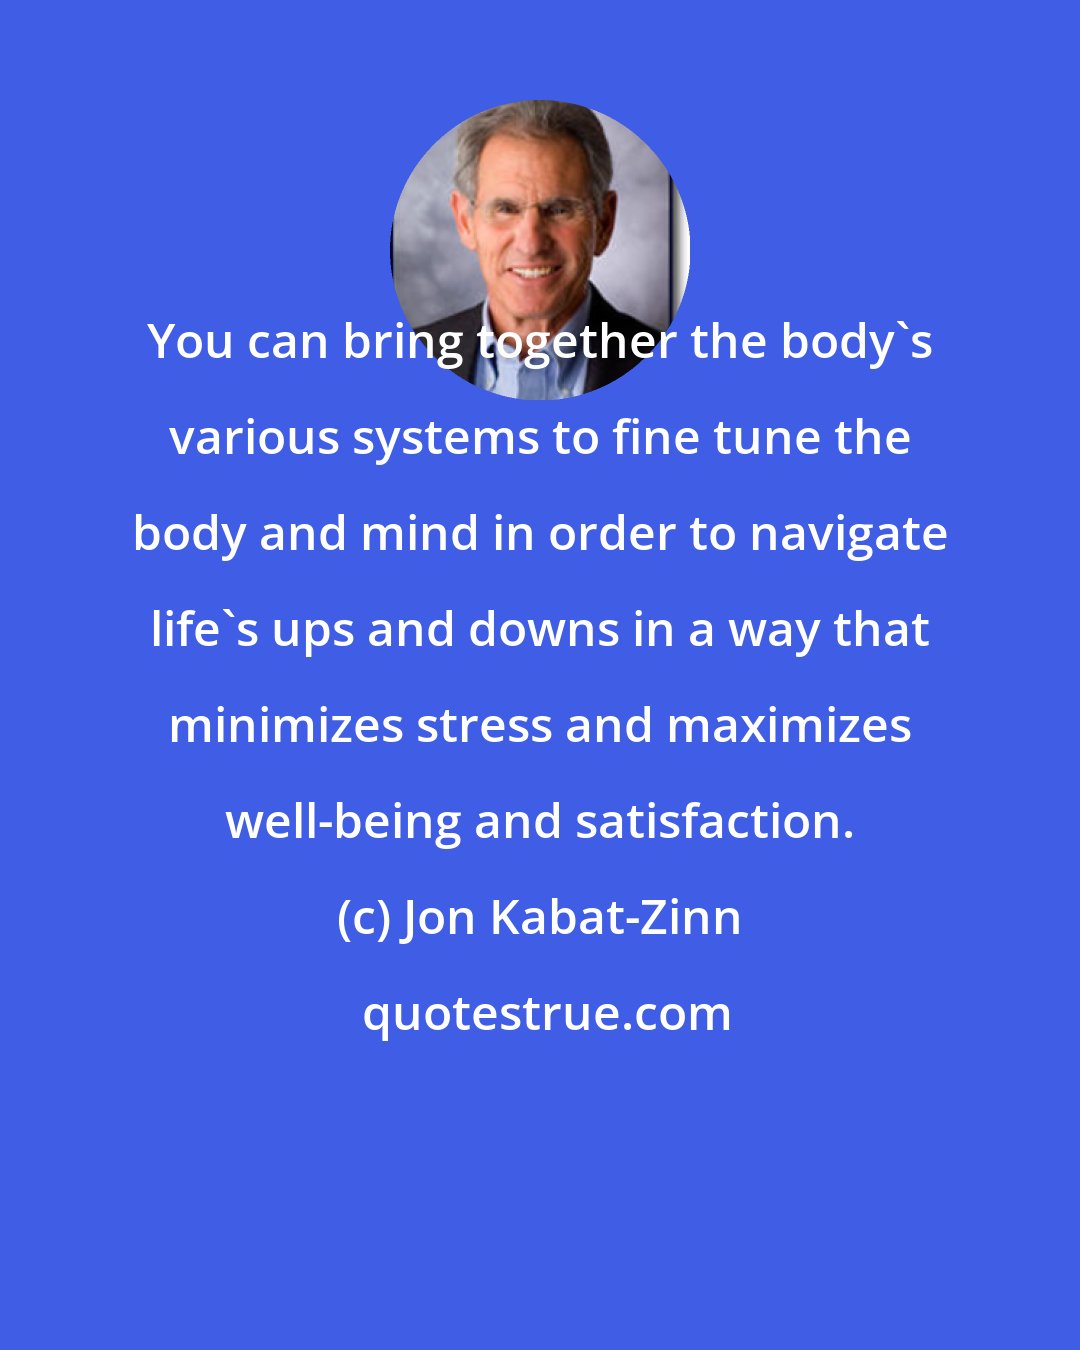 Jon Kabat-Zinn: You can bring together the body's various systems to fine tune the body and mind in order to navigate life's ups and downs in a way that minimizes stress and maximizes well-being and satisfaction.